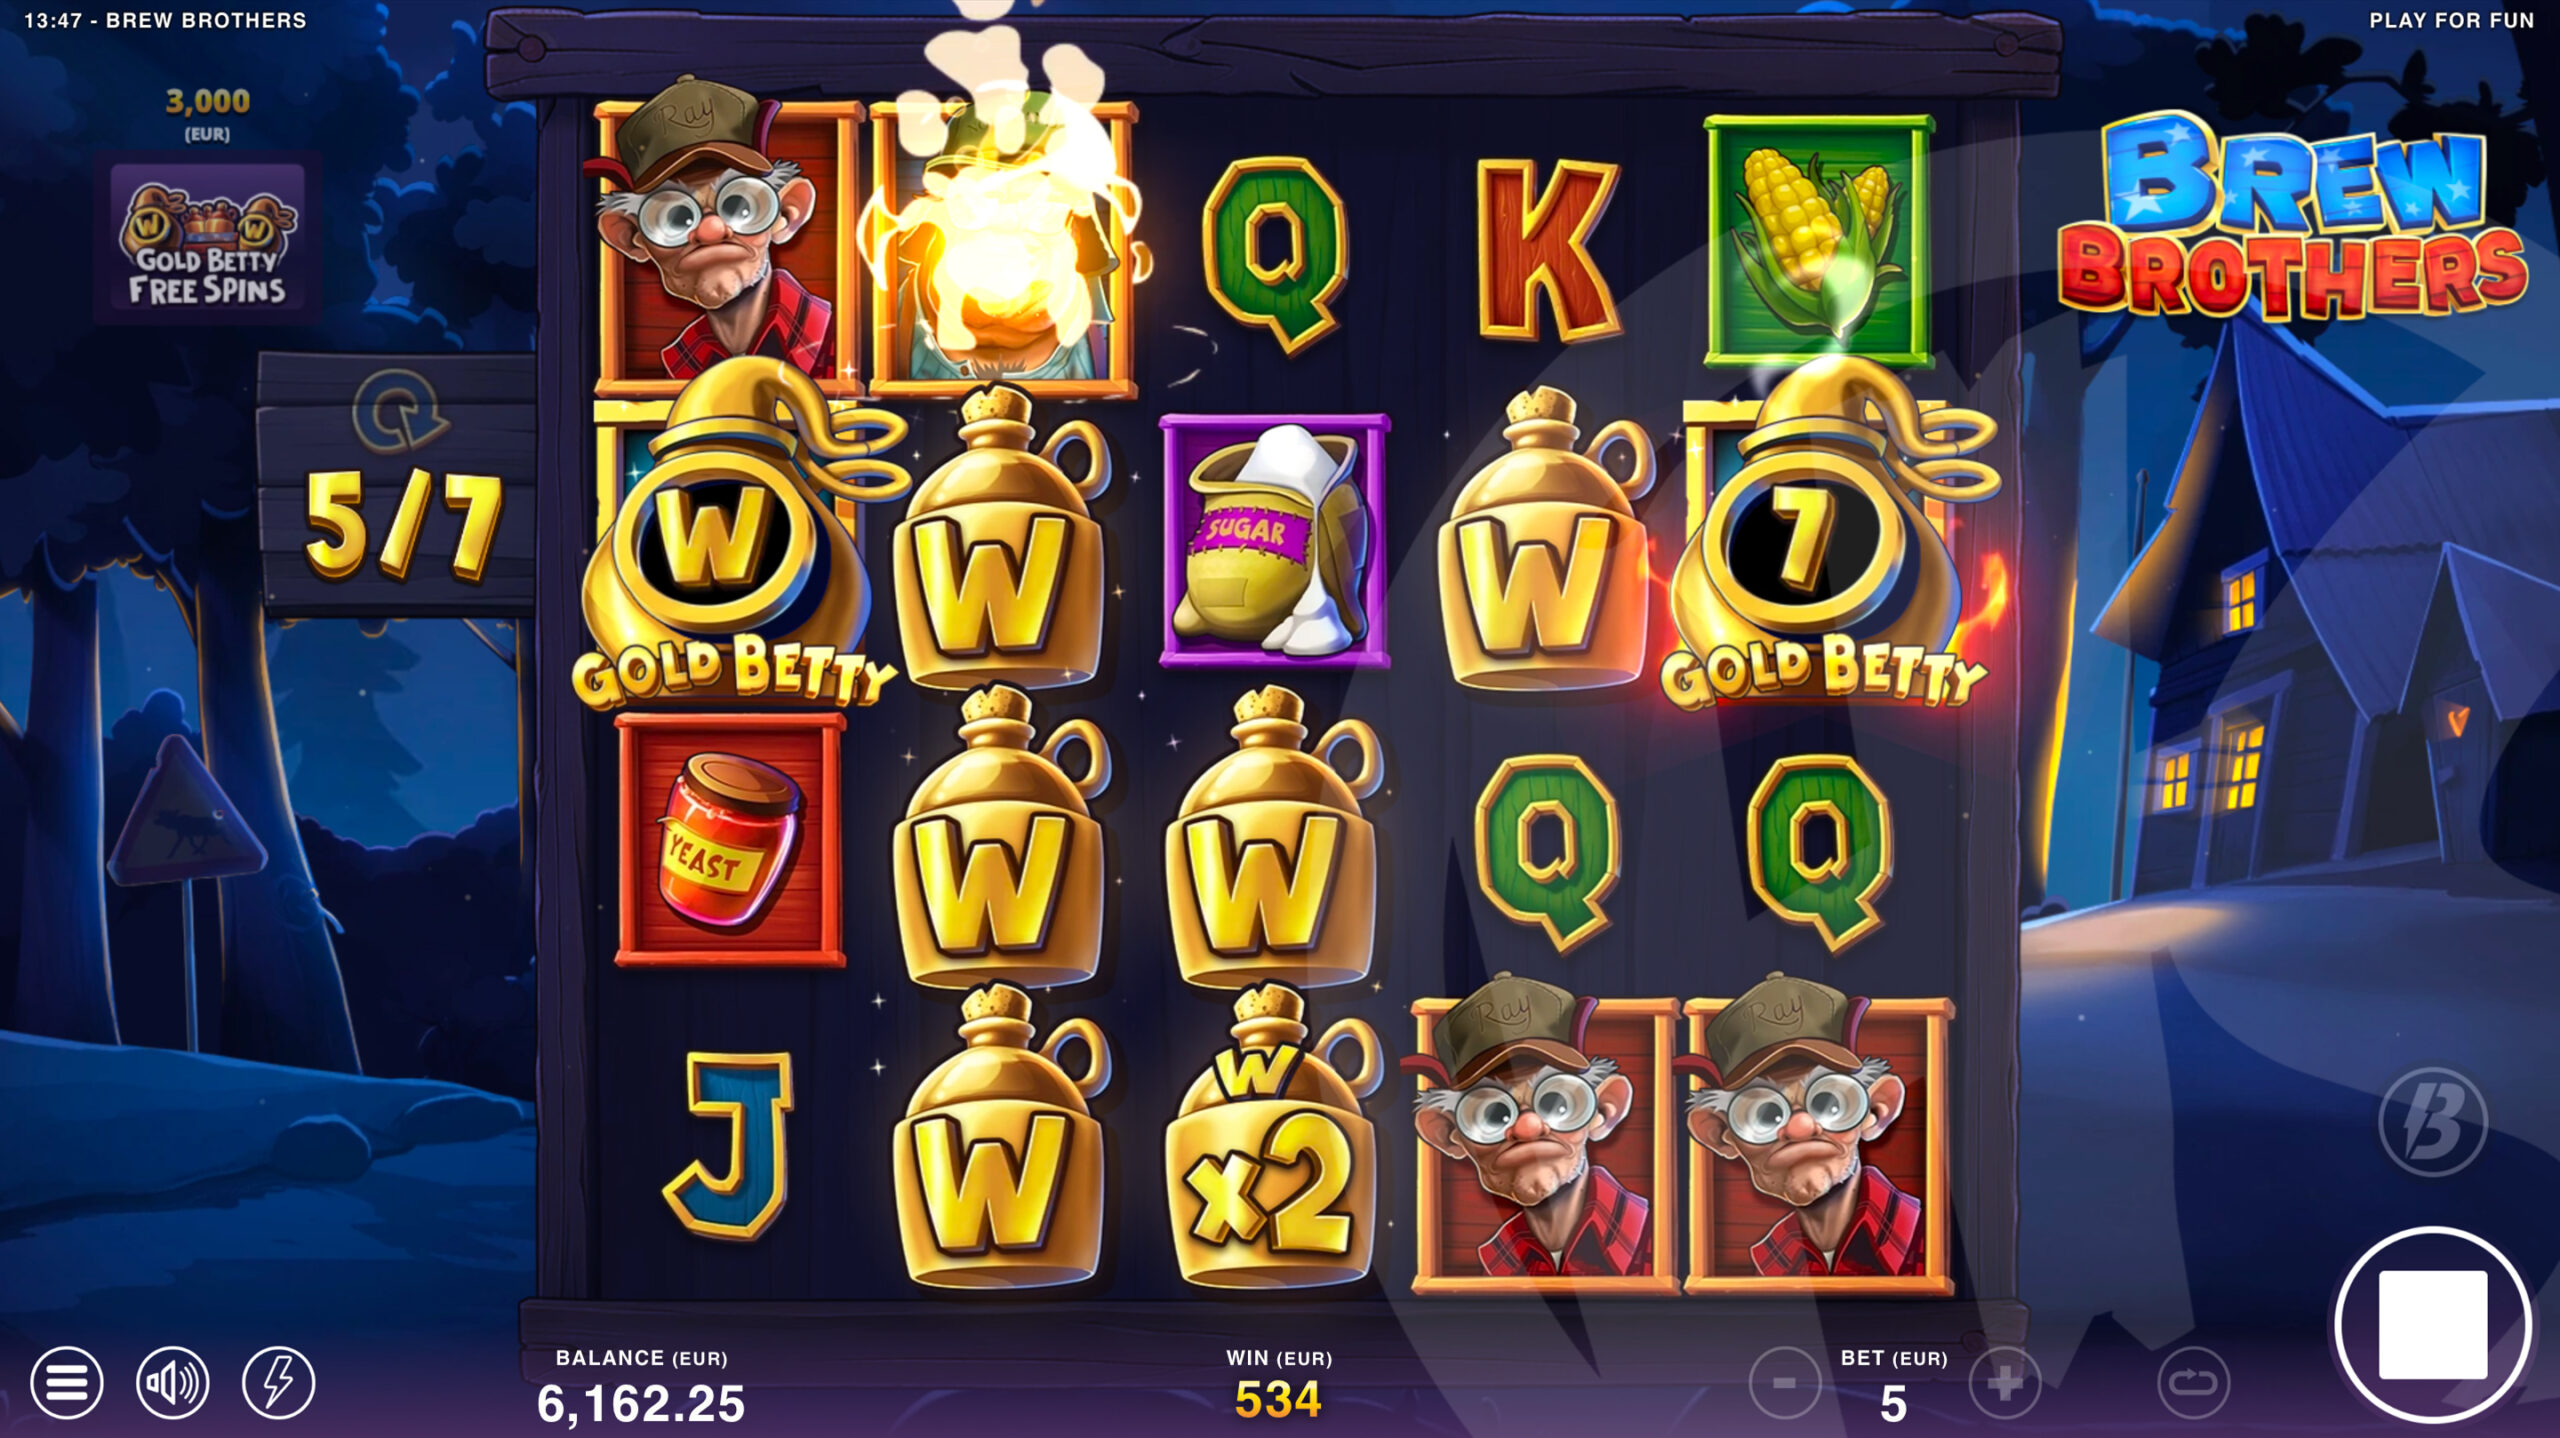 Each Gold Betty Can Add up to 9 Wild Symbols to Reels 2-5 at Once